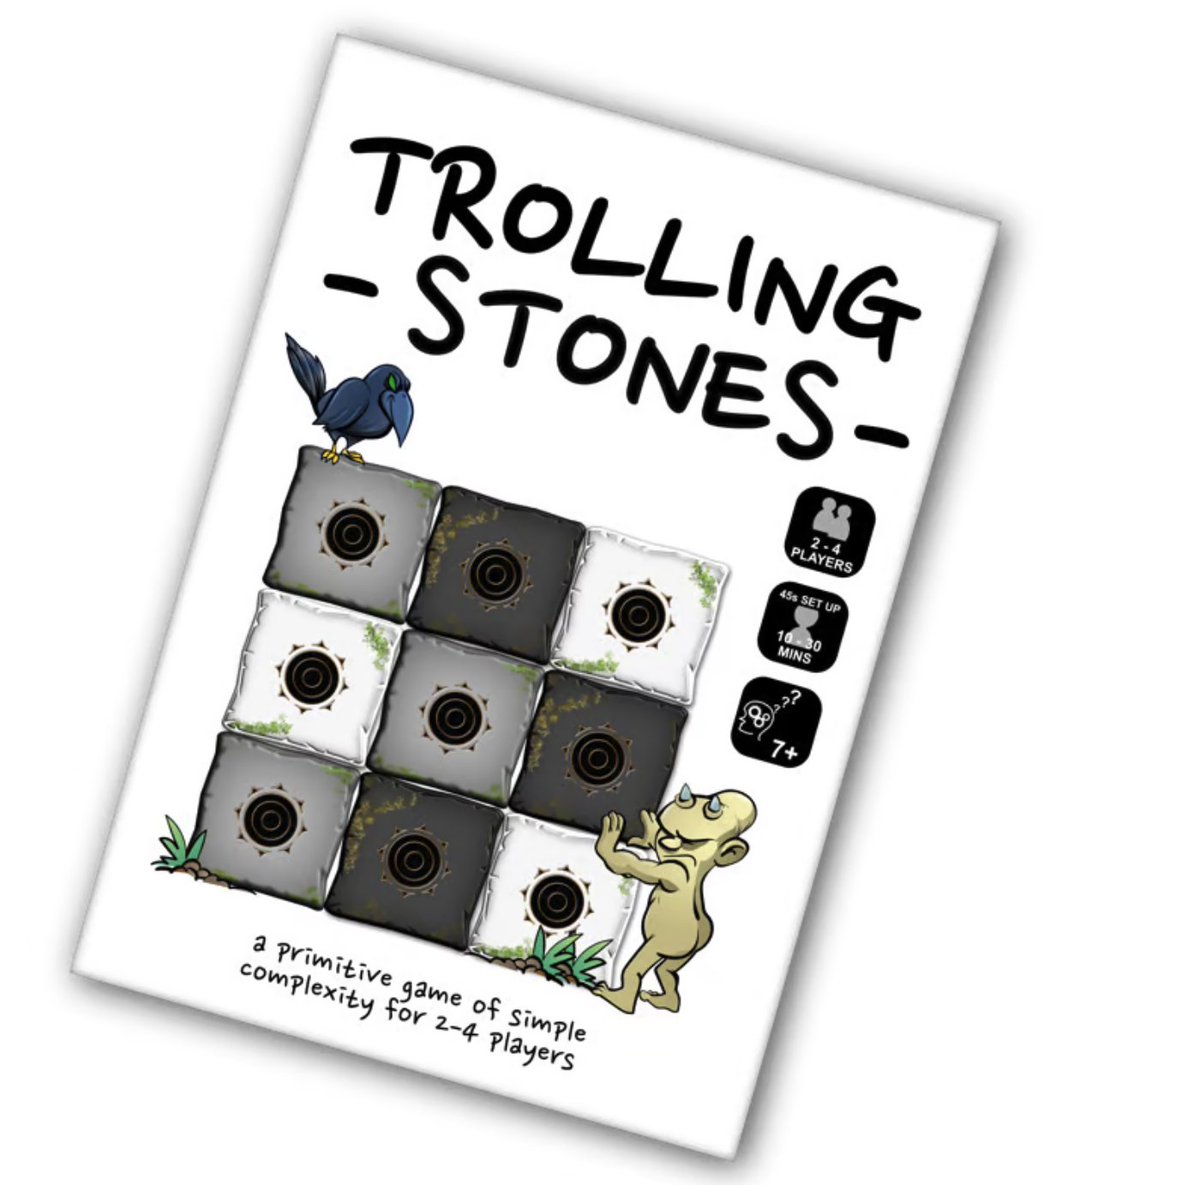 Not much time left to back Trolling Stones PnP campaign on Kickstarter. 3 stretch goals unlocked! Ending soon. kickstarter.com/projects/tri-b…
#boardgames #boardgamegeek #puzzles #tabletopgames #familyfun